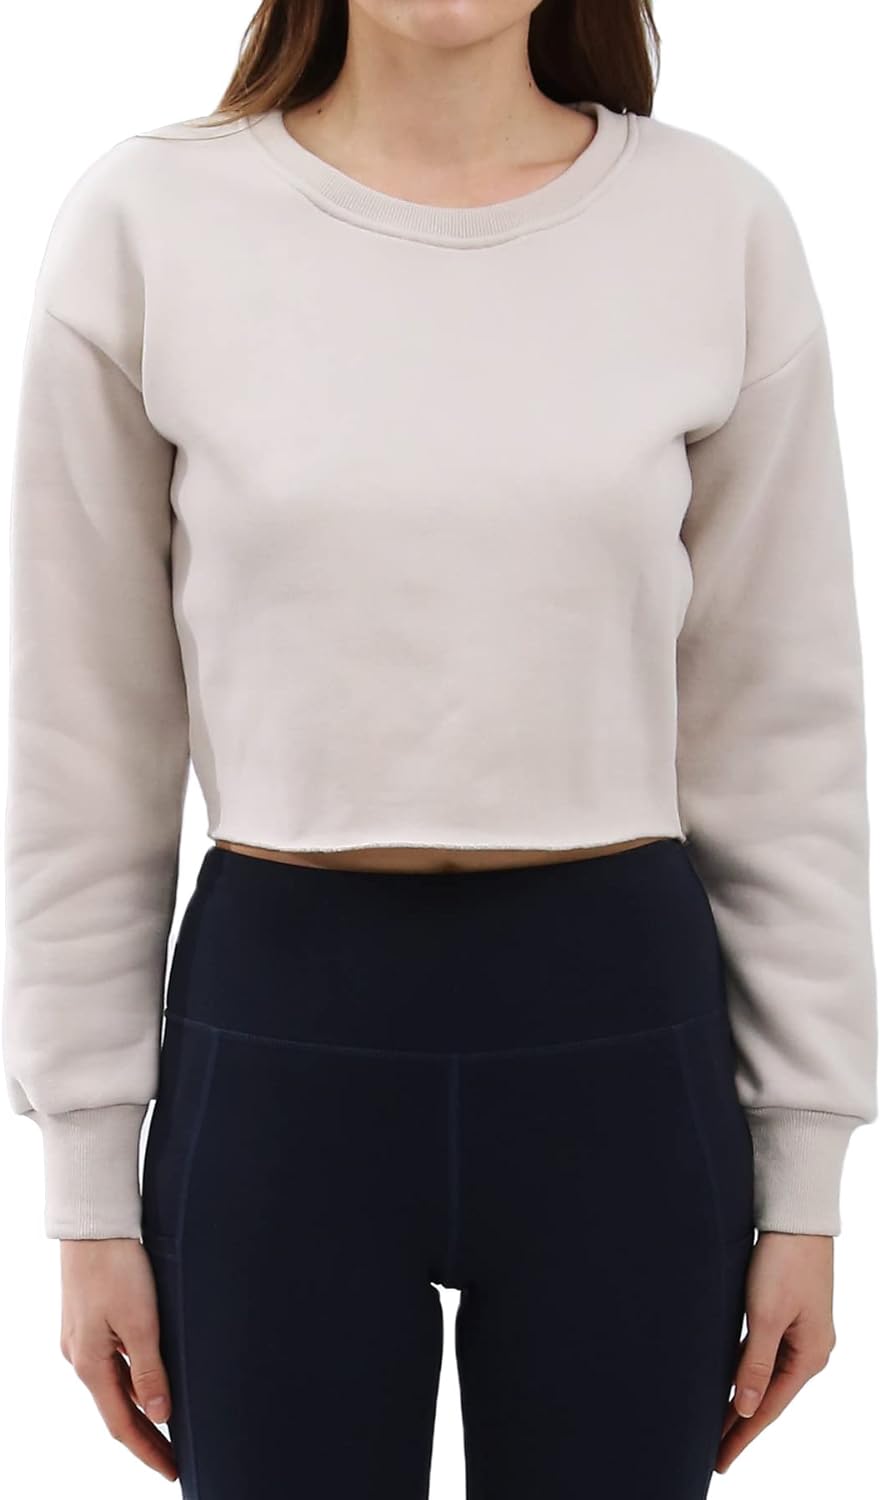 NTG Fad Apricot / Large Cropped Hoodie Casual Fleece Crop Top for Fall Winter